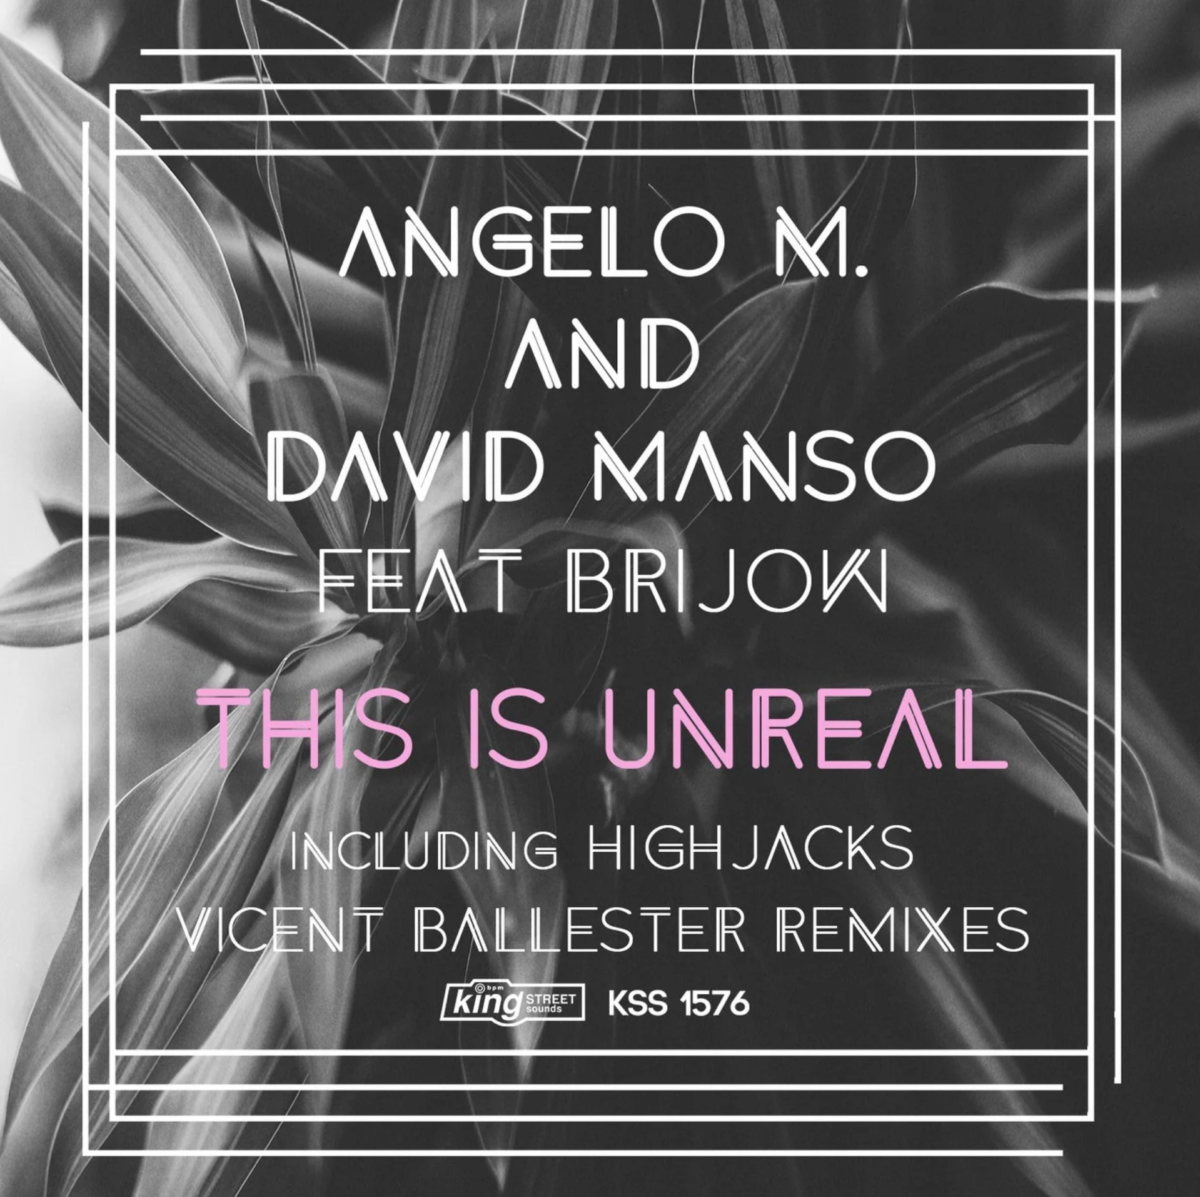 David Manso - This is Unreal